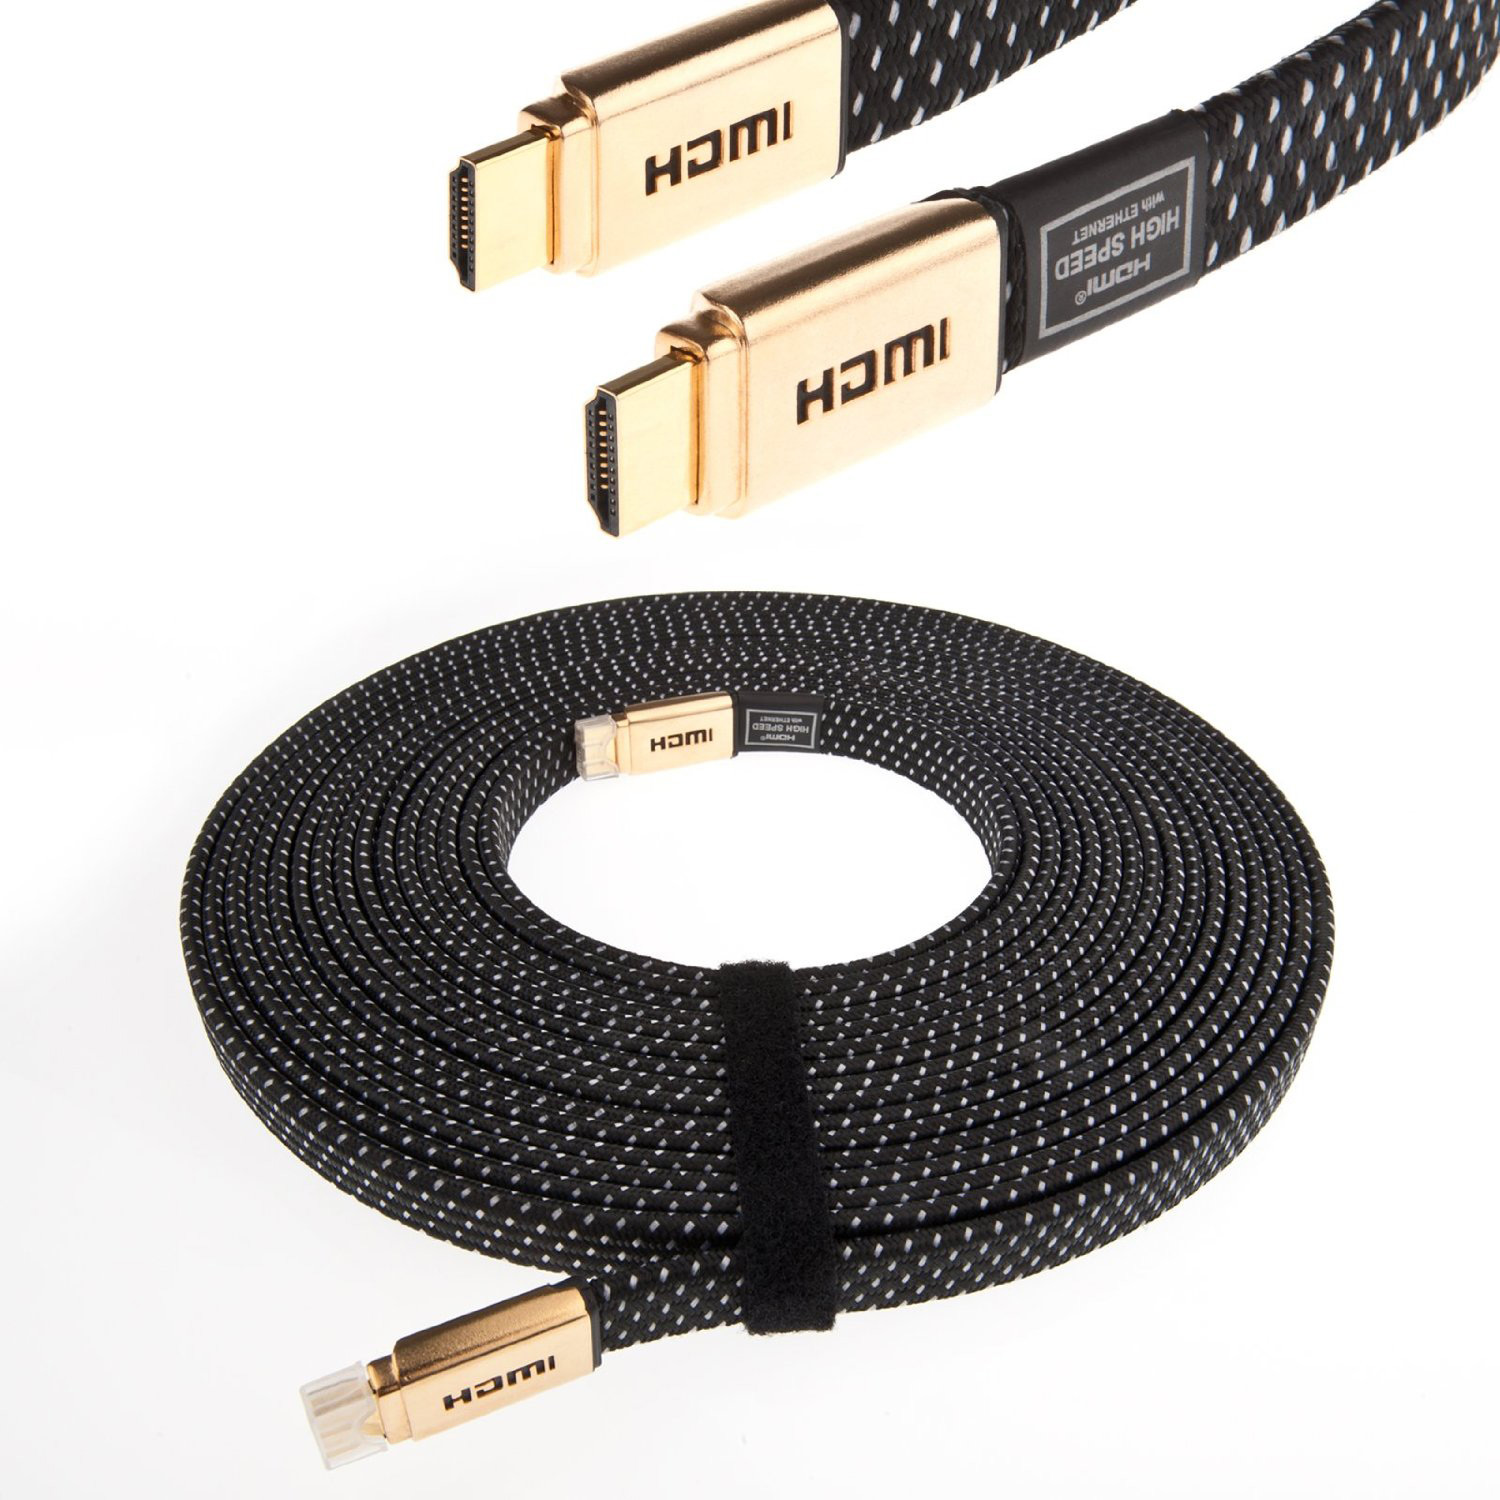 YouSave Accessories Accessories HDMI Cable 10M High Speed Gold Edition